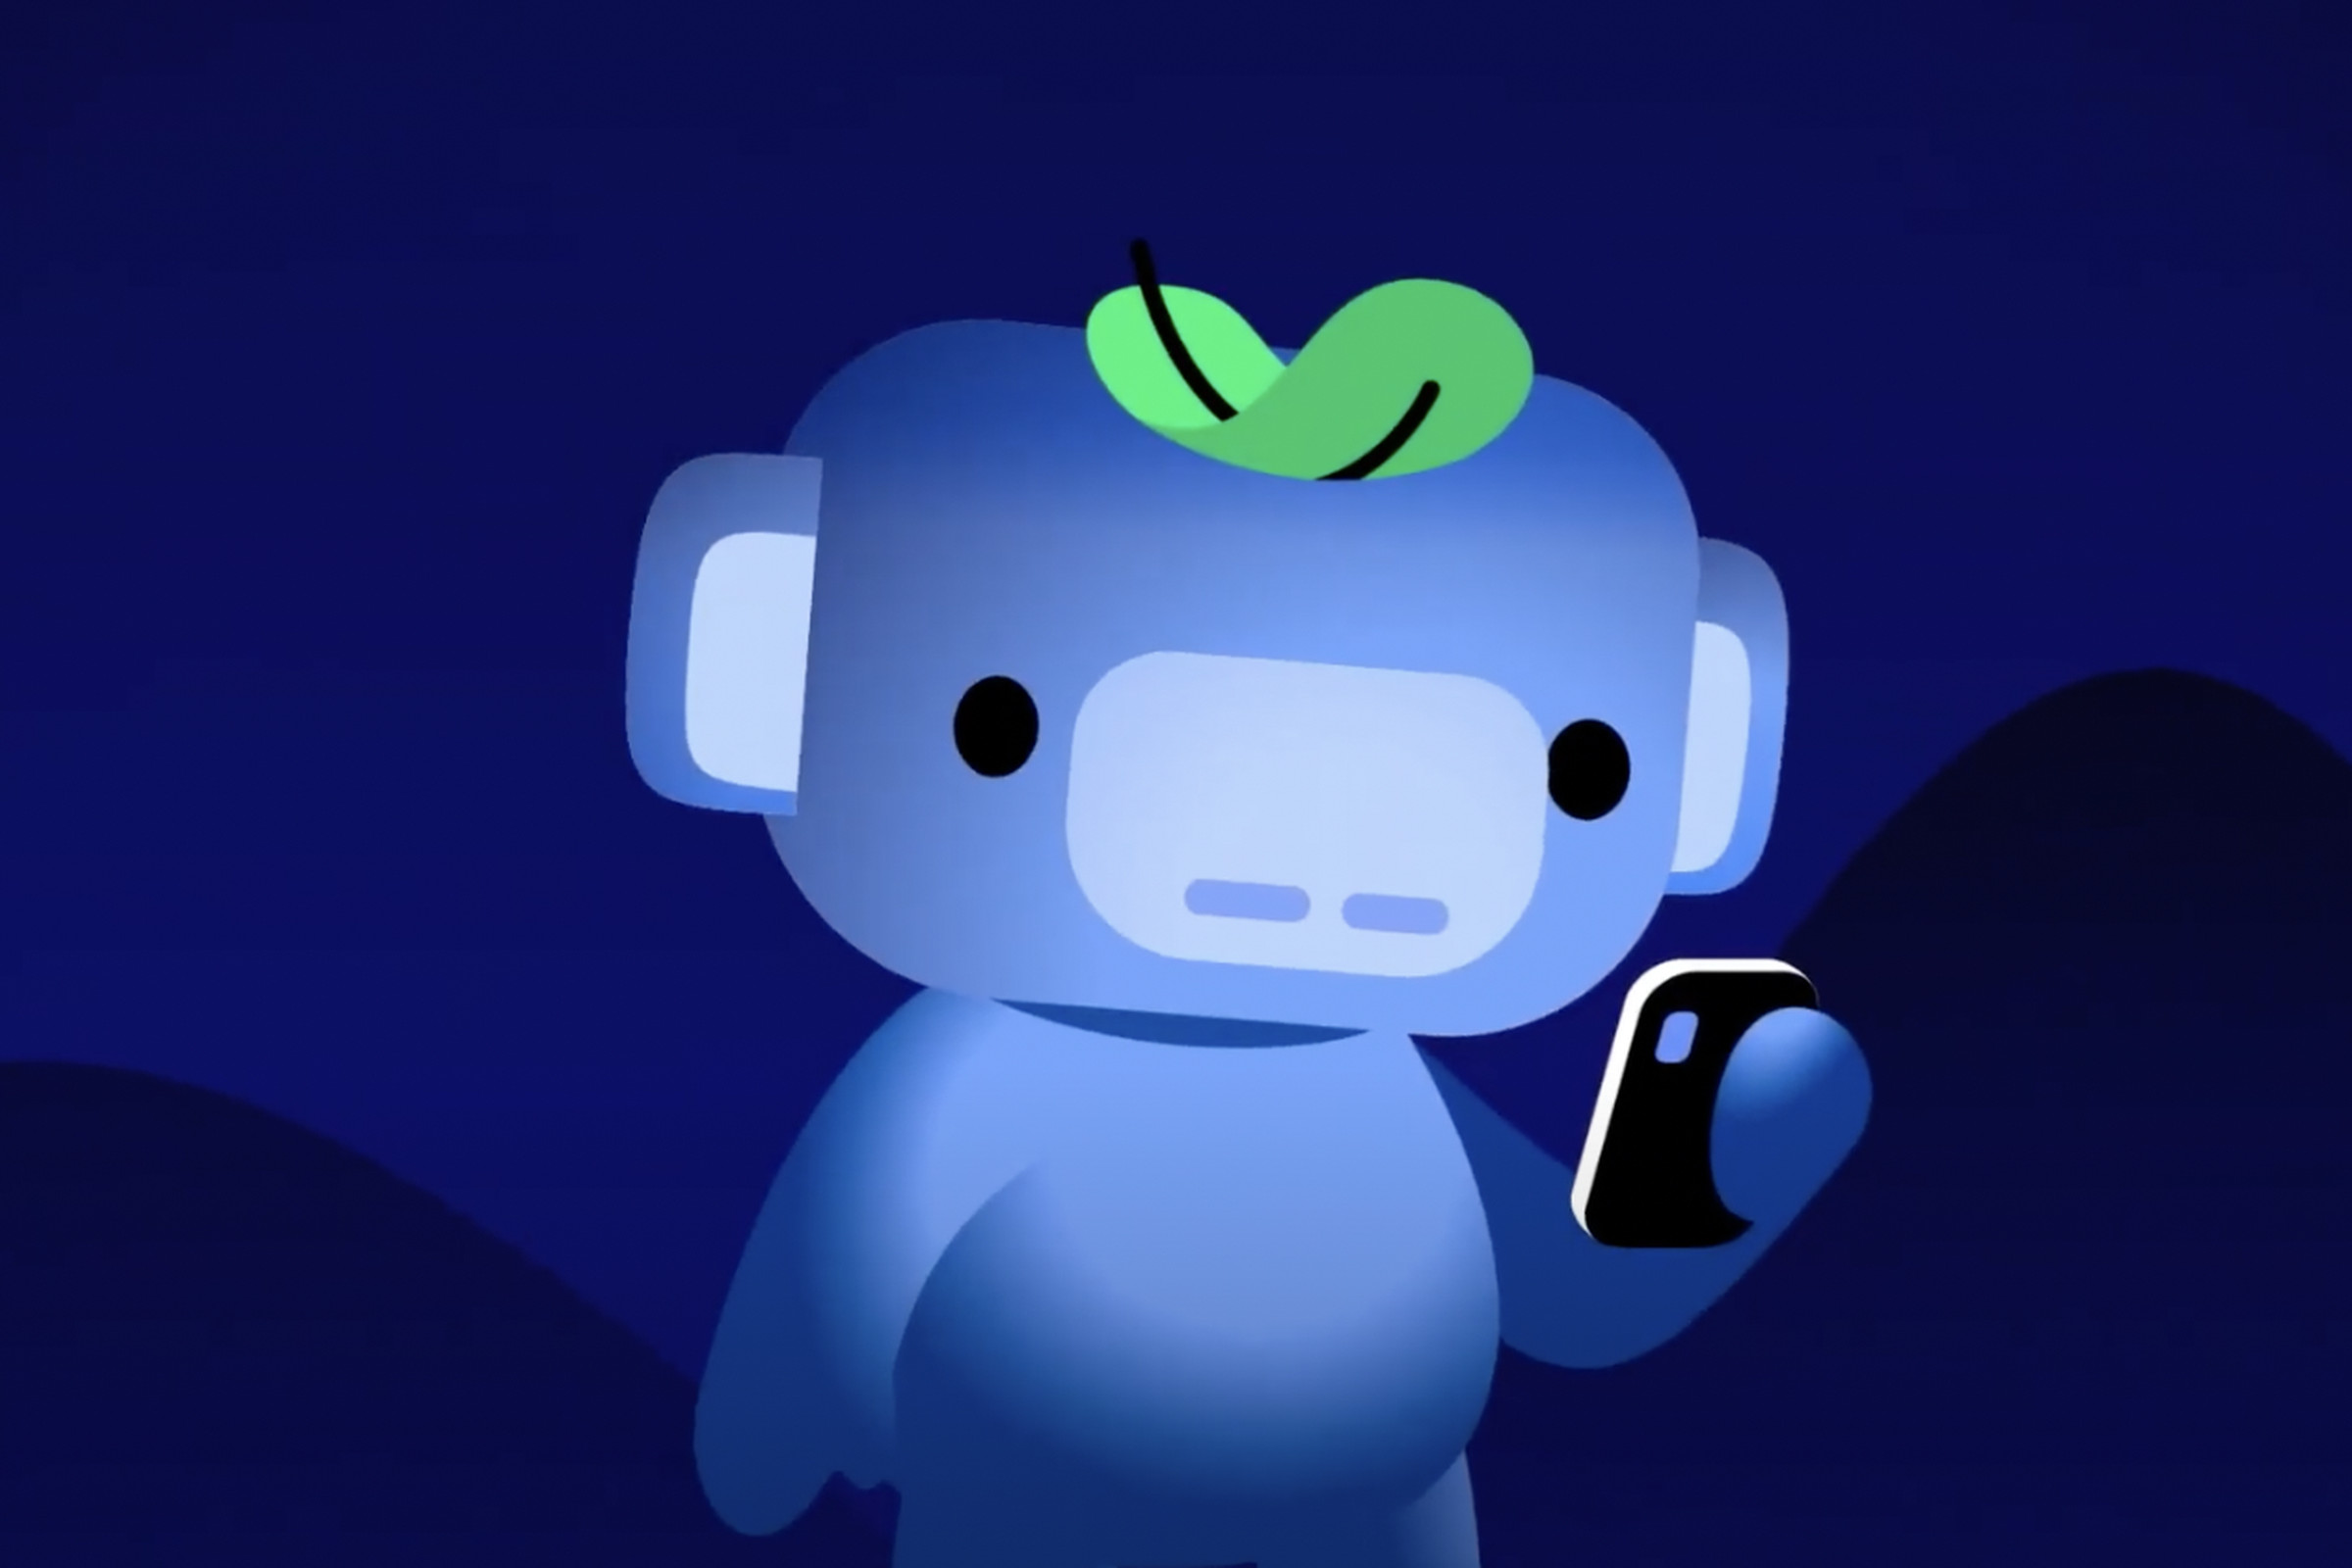 Image of Discord mascot Wumpus happily engaged with his phone.